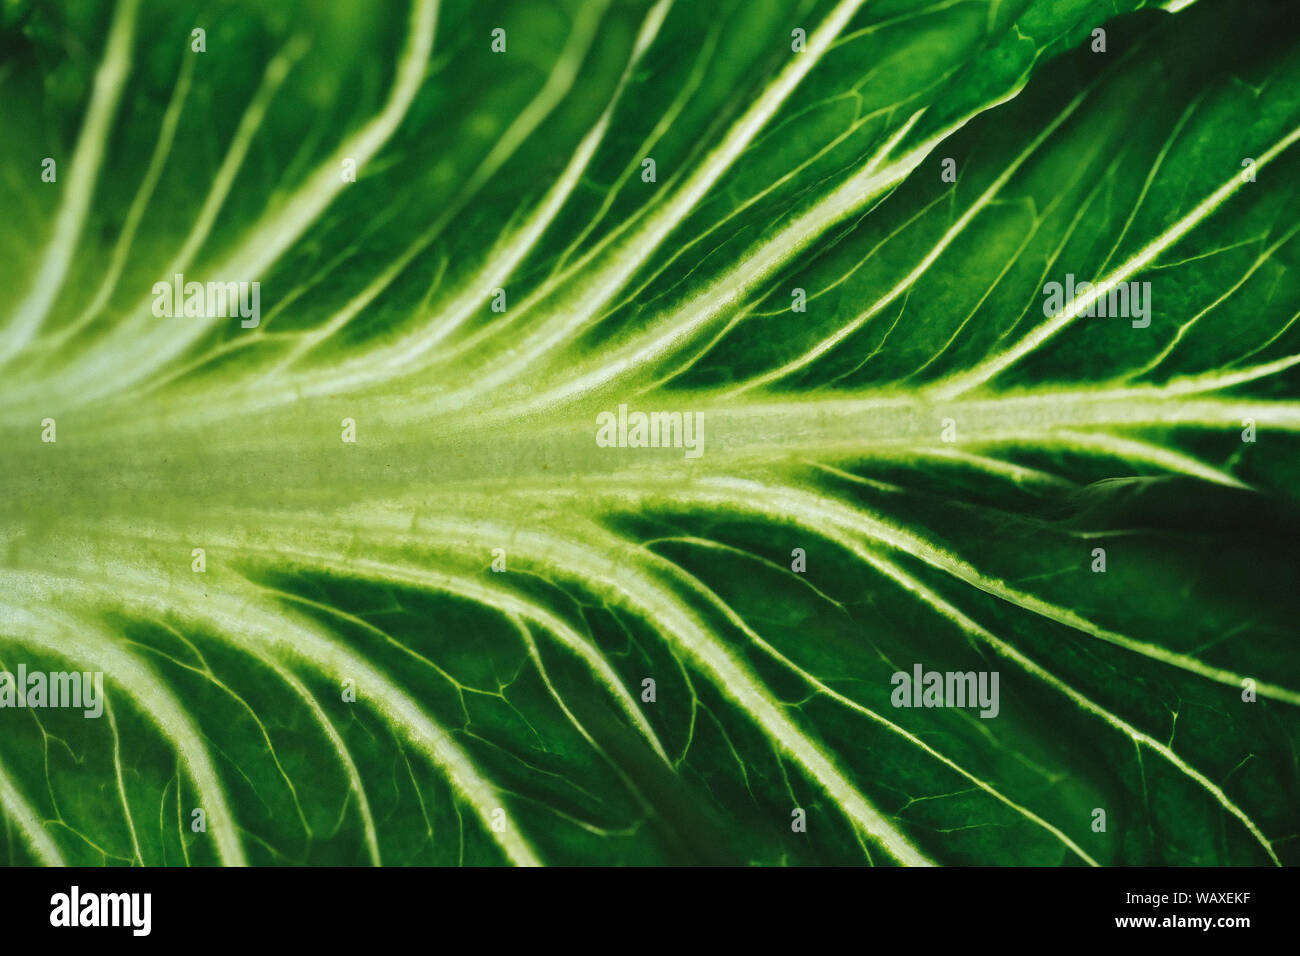 Food and ingredients. Green leaf in close-up Stock Photo